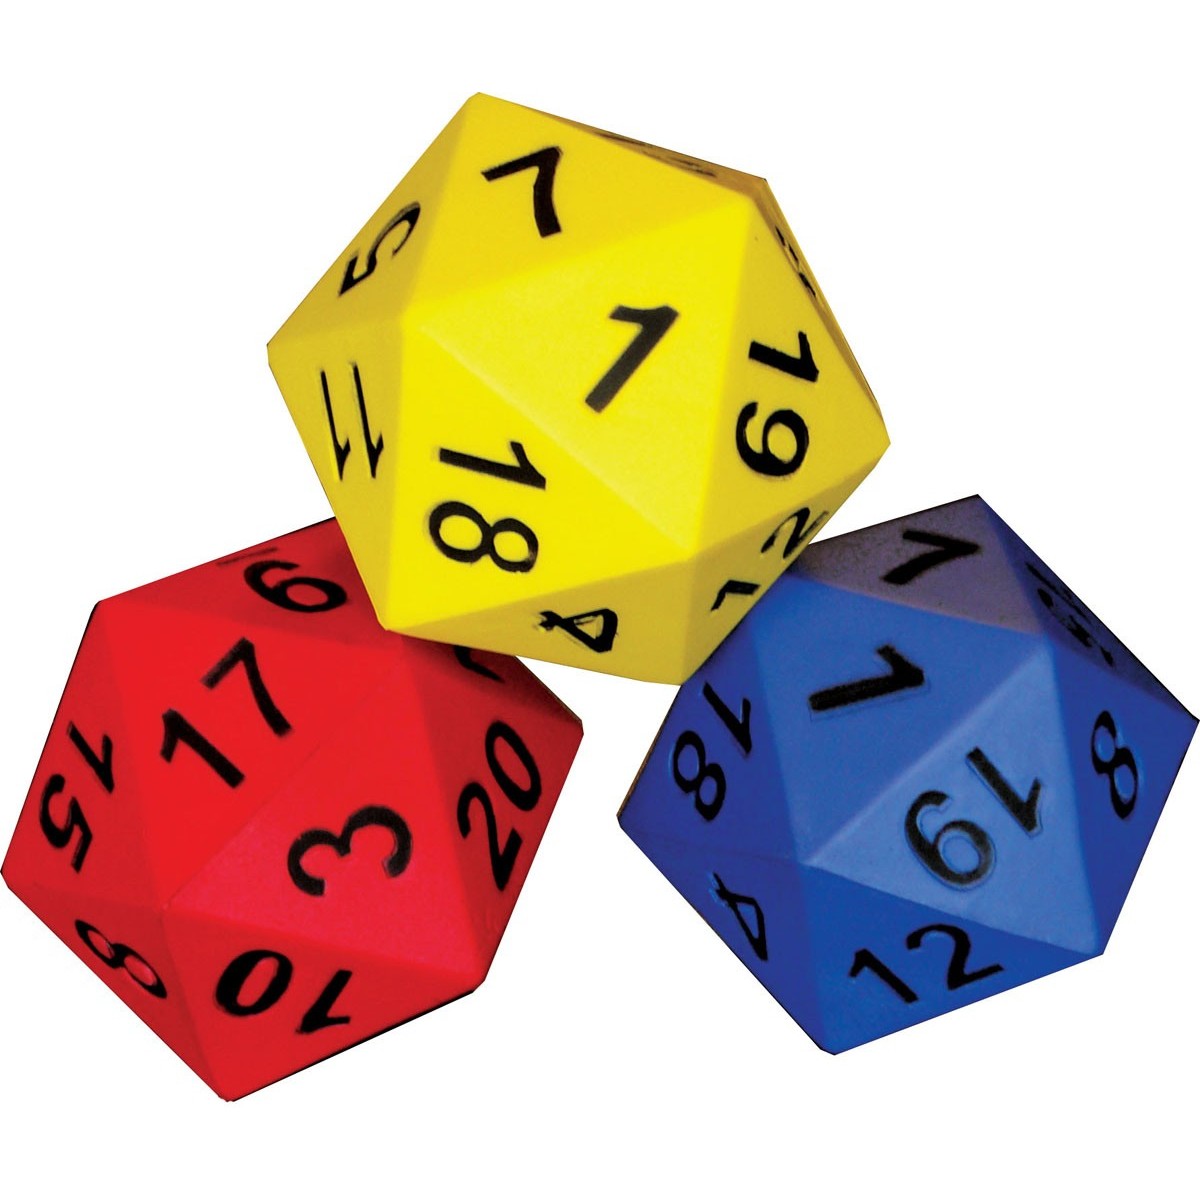 20 Sided Dice Silent 20 Sided Giant Dice